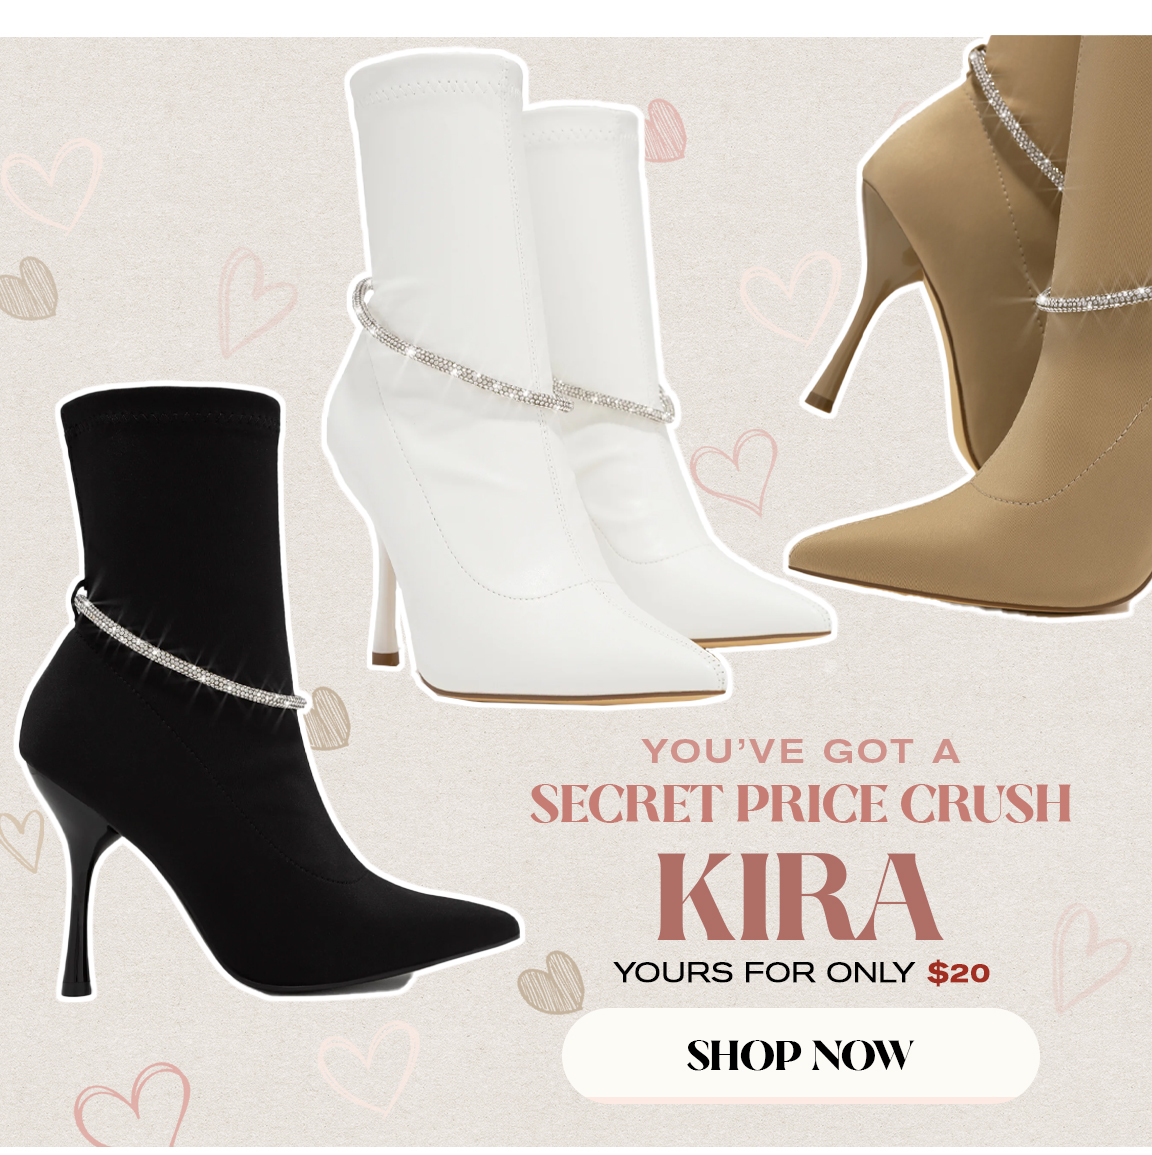  YOUVE GOT A SECRET PRICE CRUSH KIRA YOURS FOR ONLY $20 SHOP NOW 